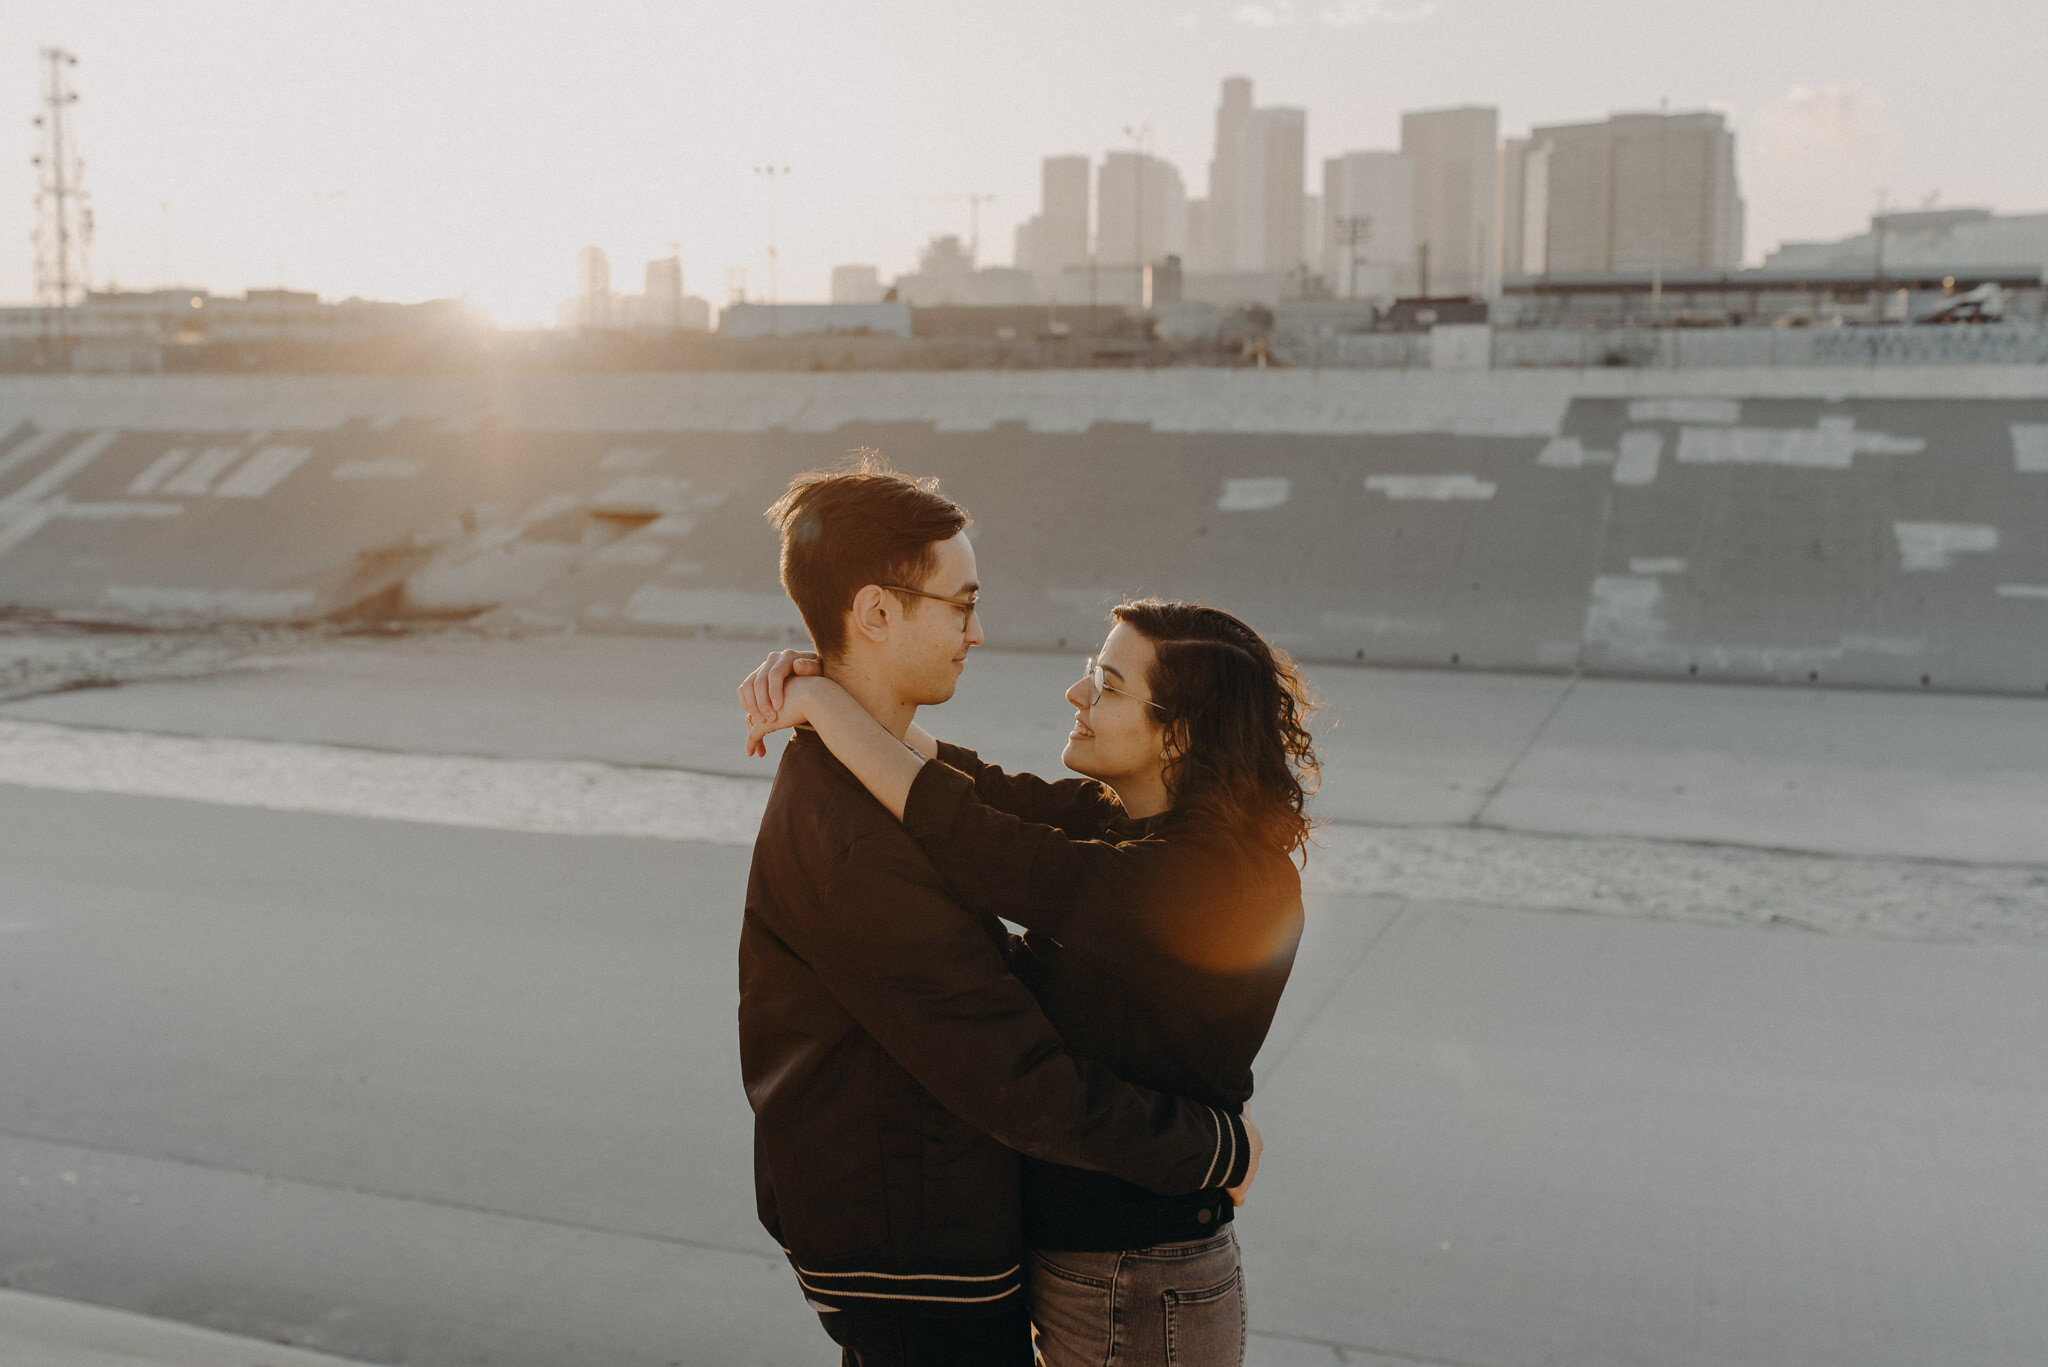 wedding photographer in los angeles - long beach wedding photography - dtla engagement session - isaiahandtaylor.com -046.jpg